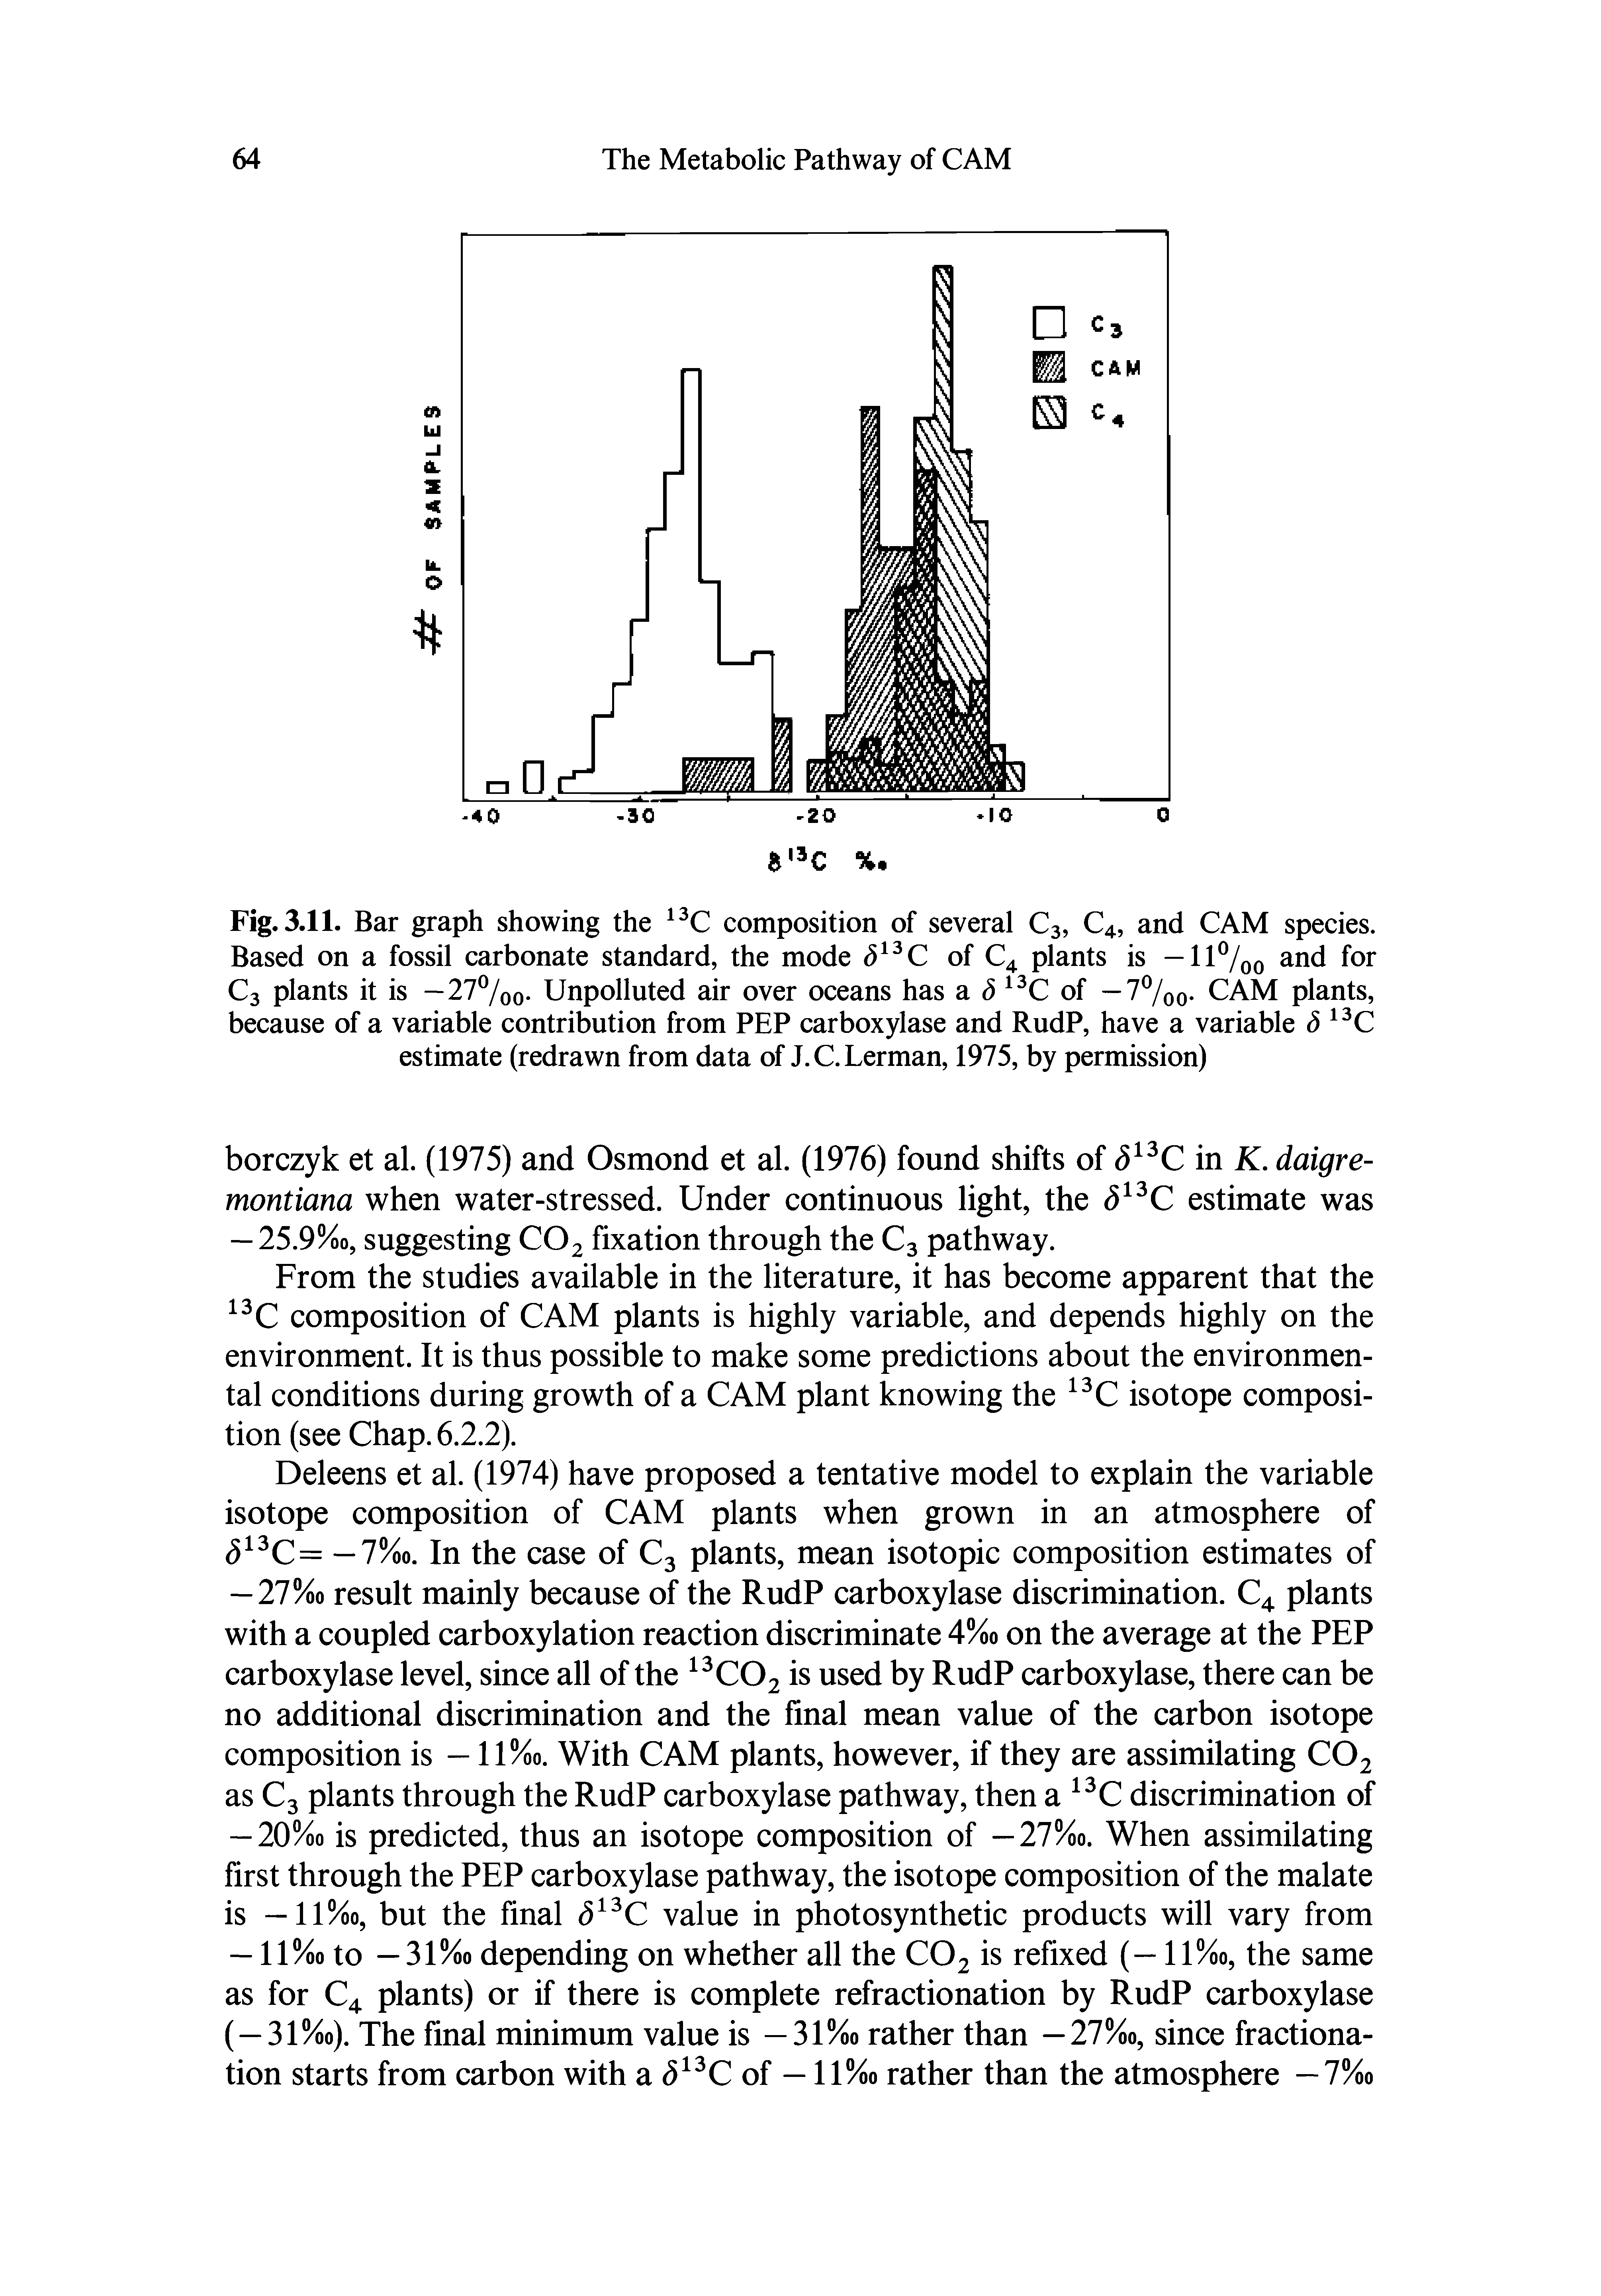 Fig. 3.11. Bar graph showing the composition of several C3, C4, and CAM species. Based on a fossil carbonate standard, the mode C of C4 plants is —11 /qq and for C3 plants it is — 27%o Unpolluted air over oceans has a C of — 7%o- CAM plants, because of a variable contribution from PEP carboxylase and RudP, have a variable C estimate (redrawn from data of J.C.Lerman, 1975, by permission)...